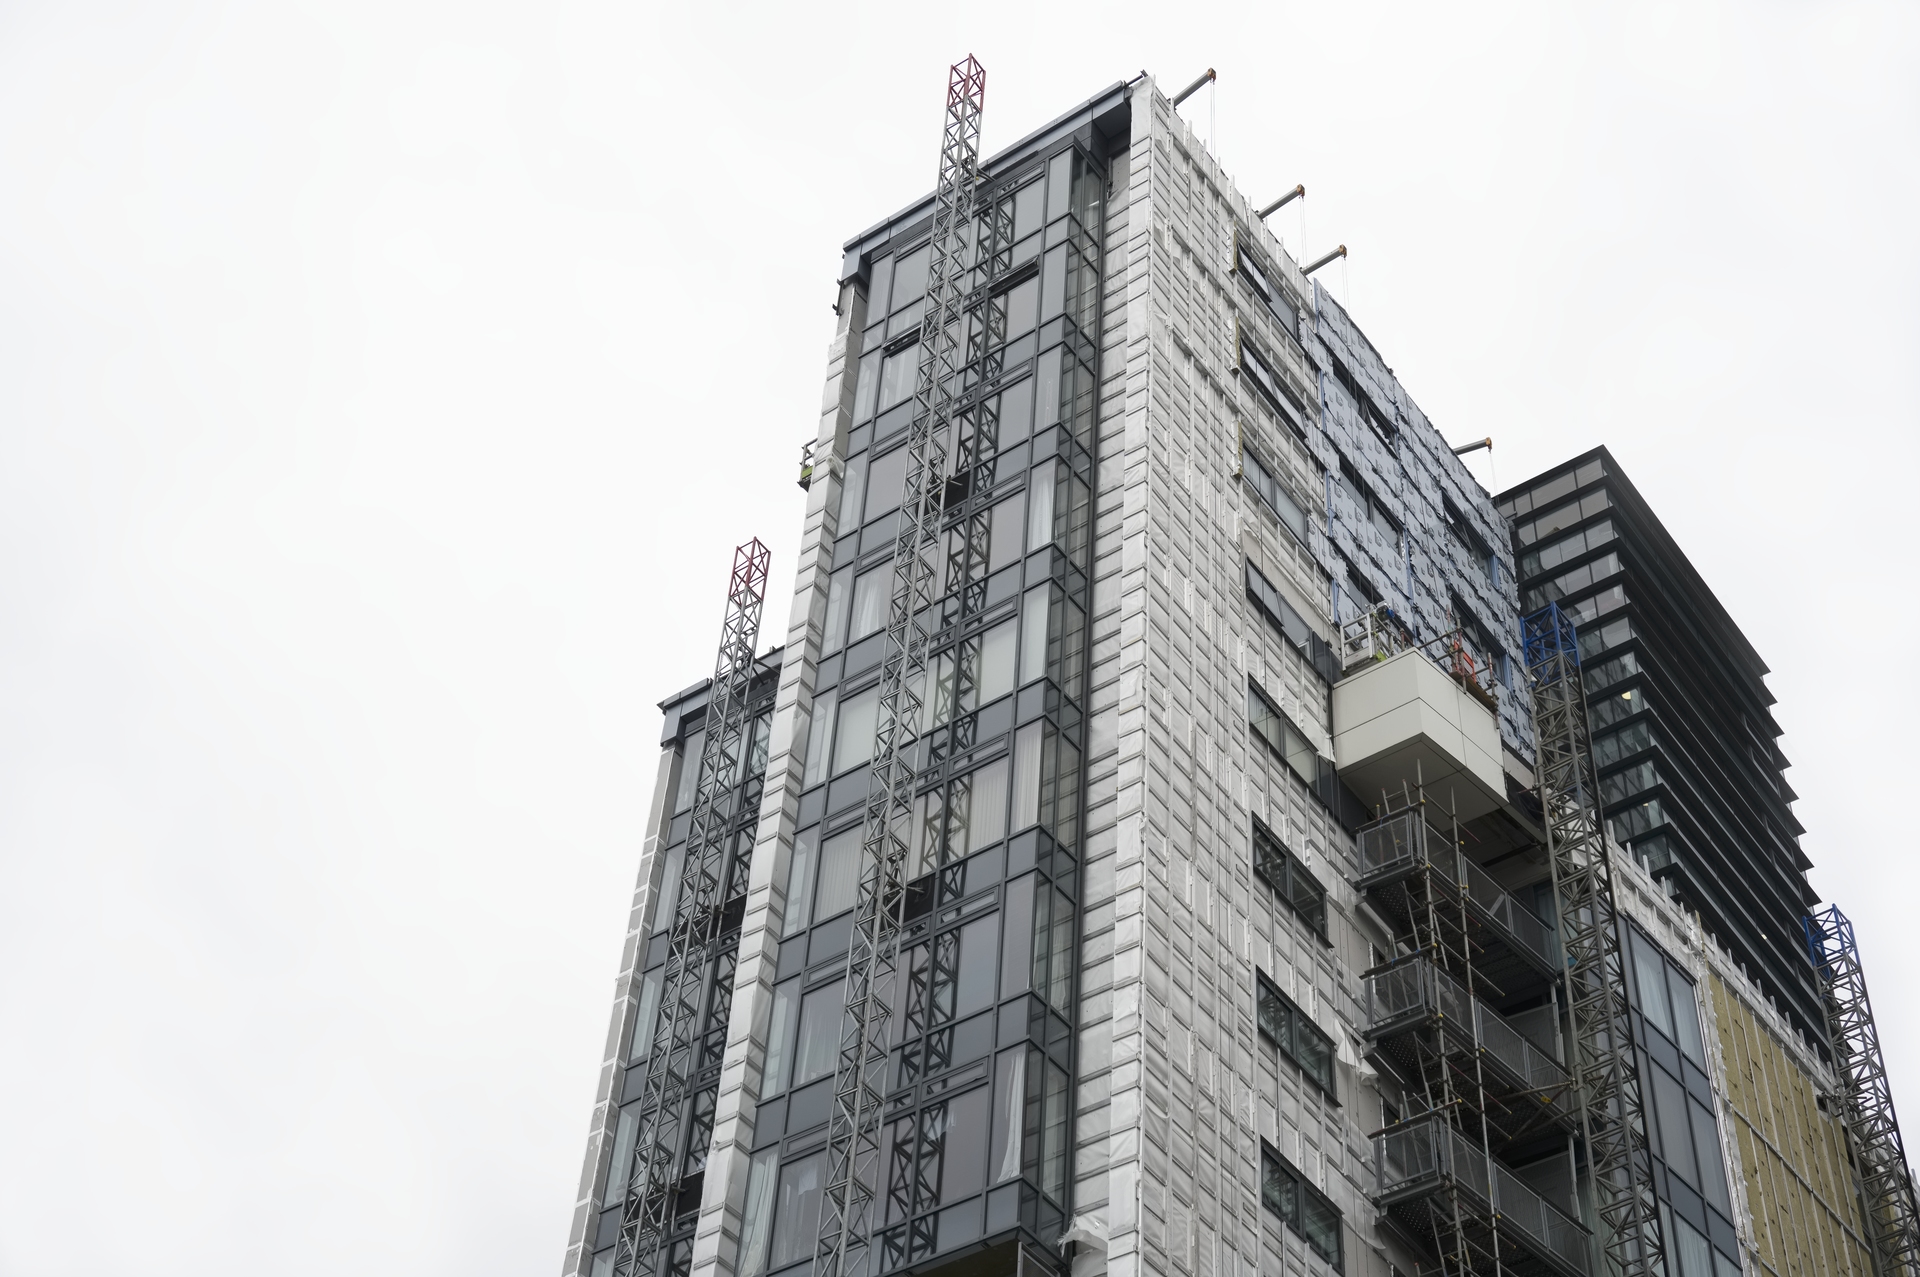 High rise residential building of flats with cladding being replaced with fire resistant materials.